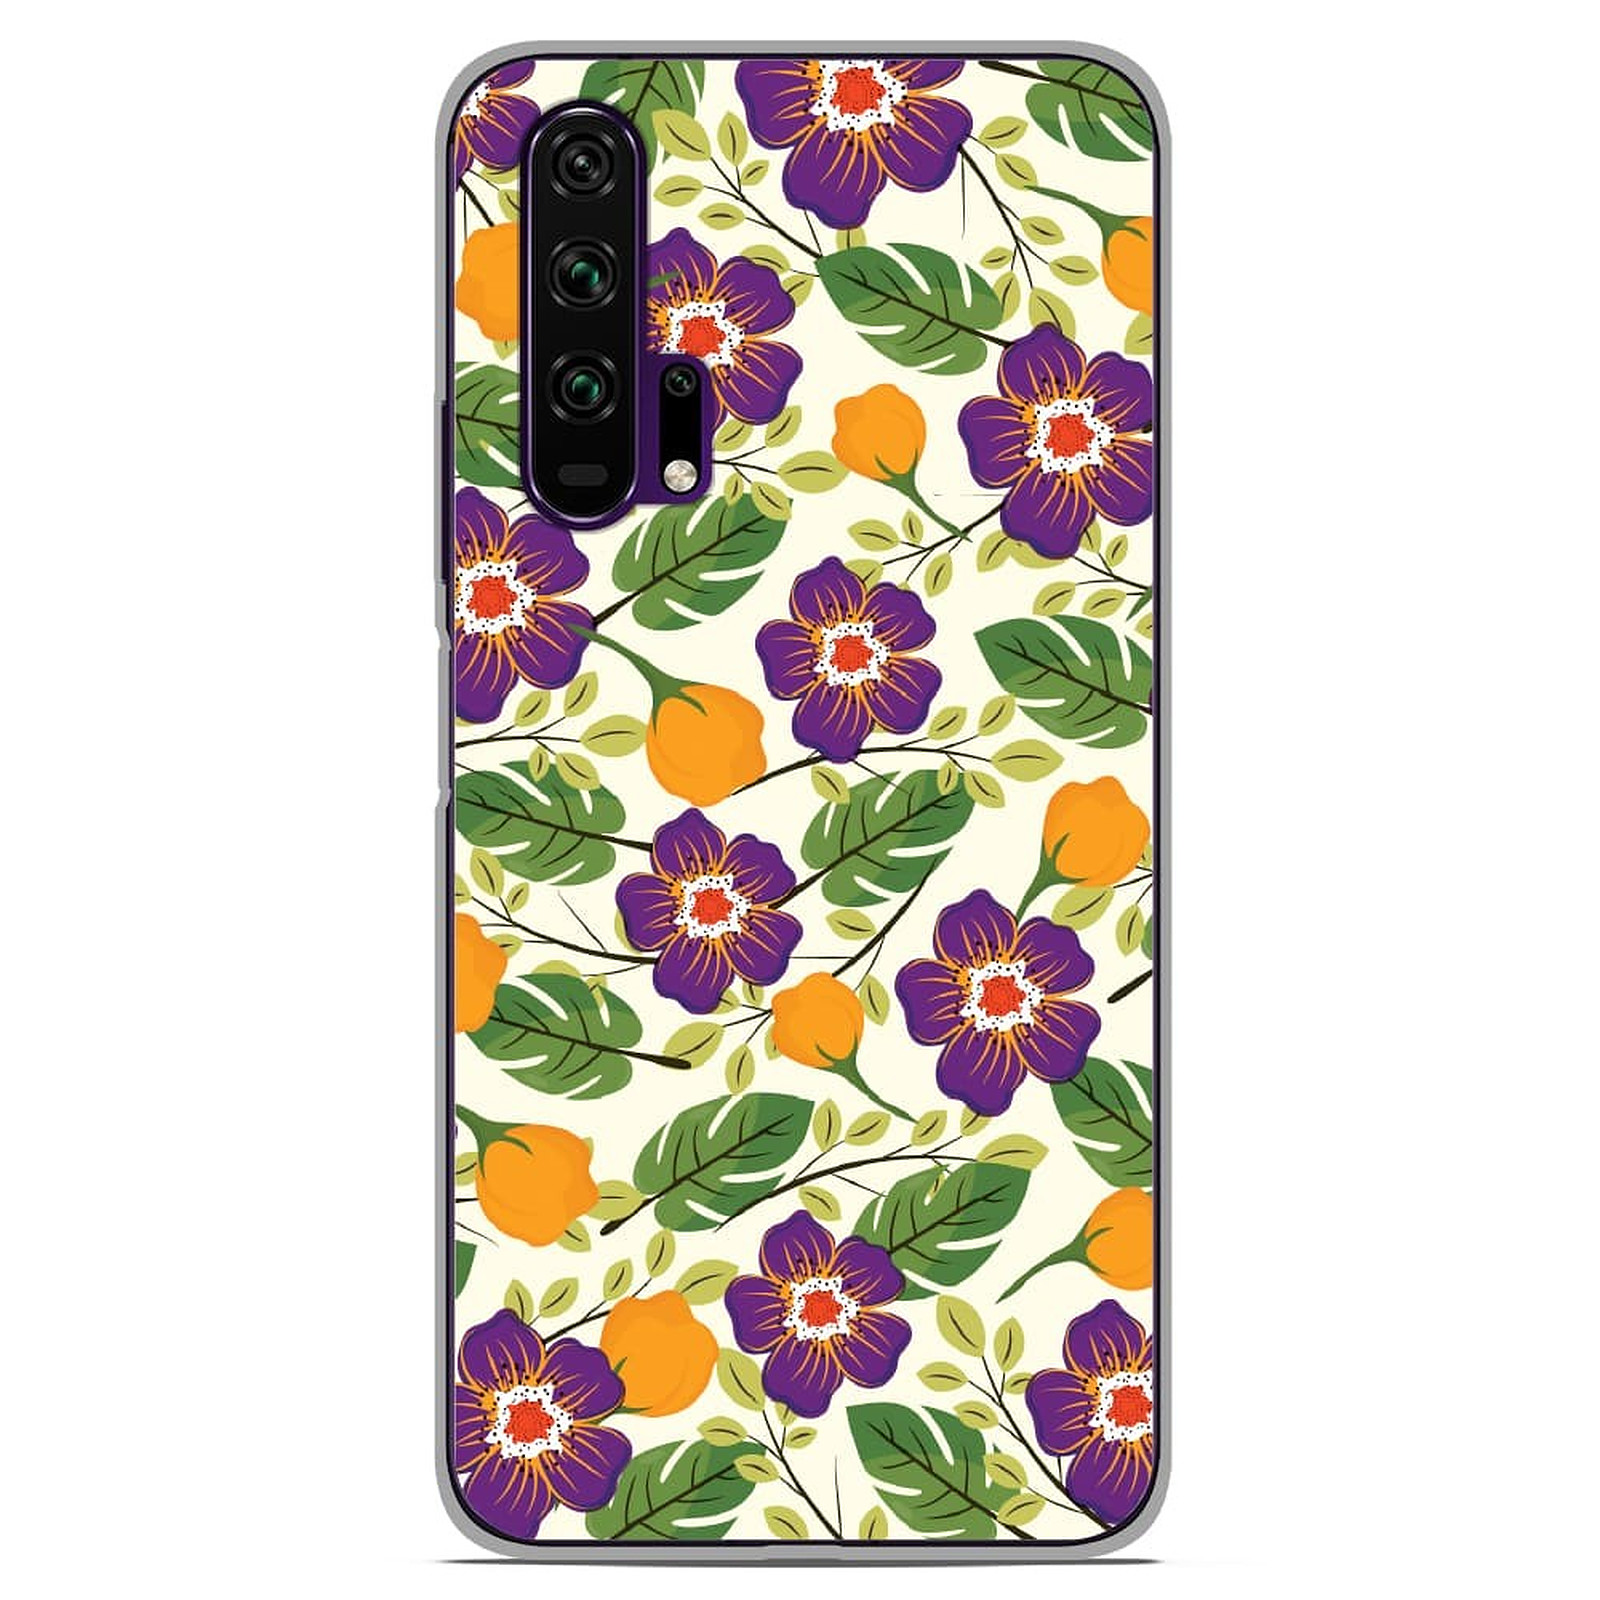 1001 Coques Coque silicone gel Huawei Honor 20 Pro motif Fleurs Violettes - Coque telephone 1001Coques